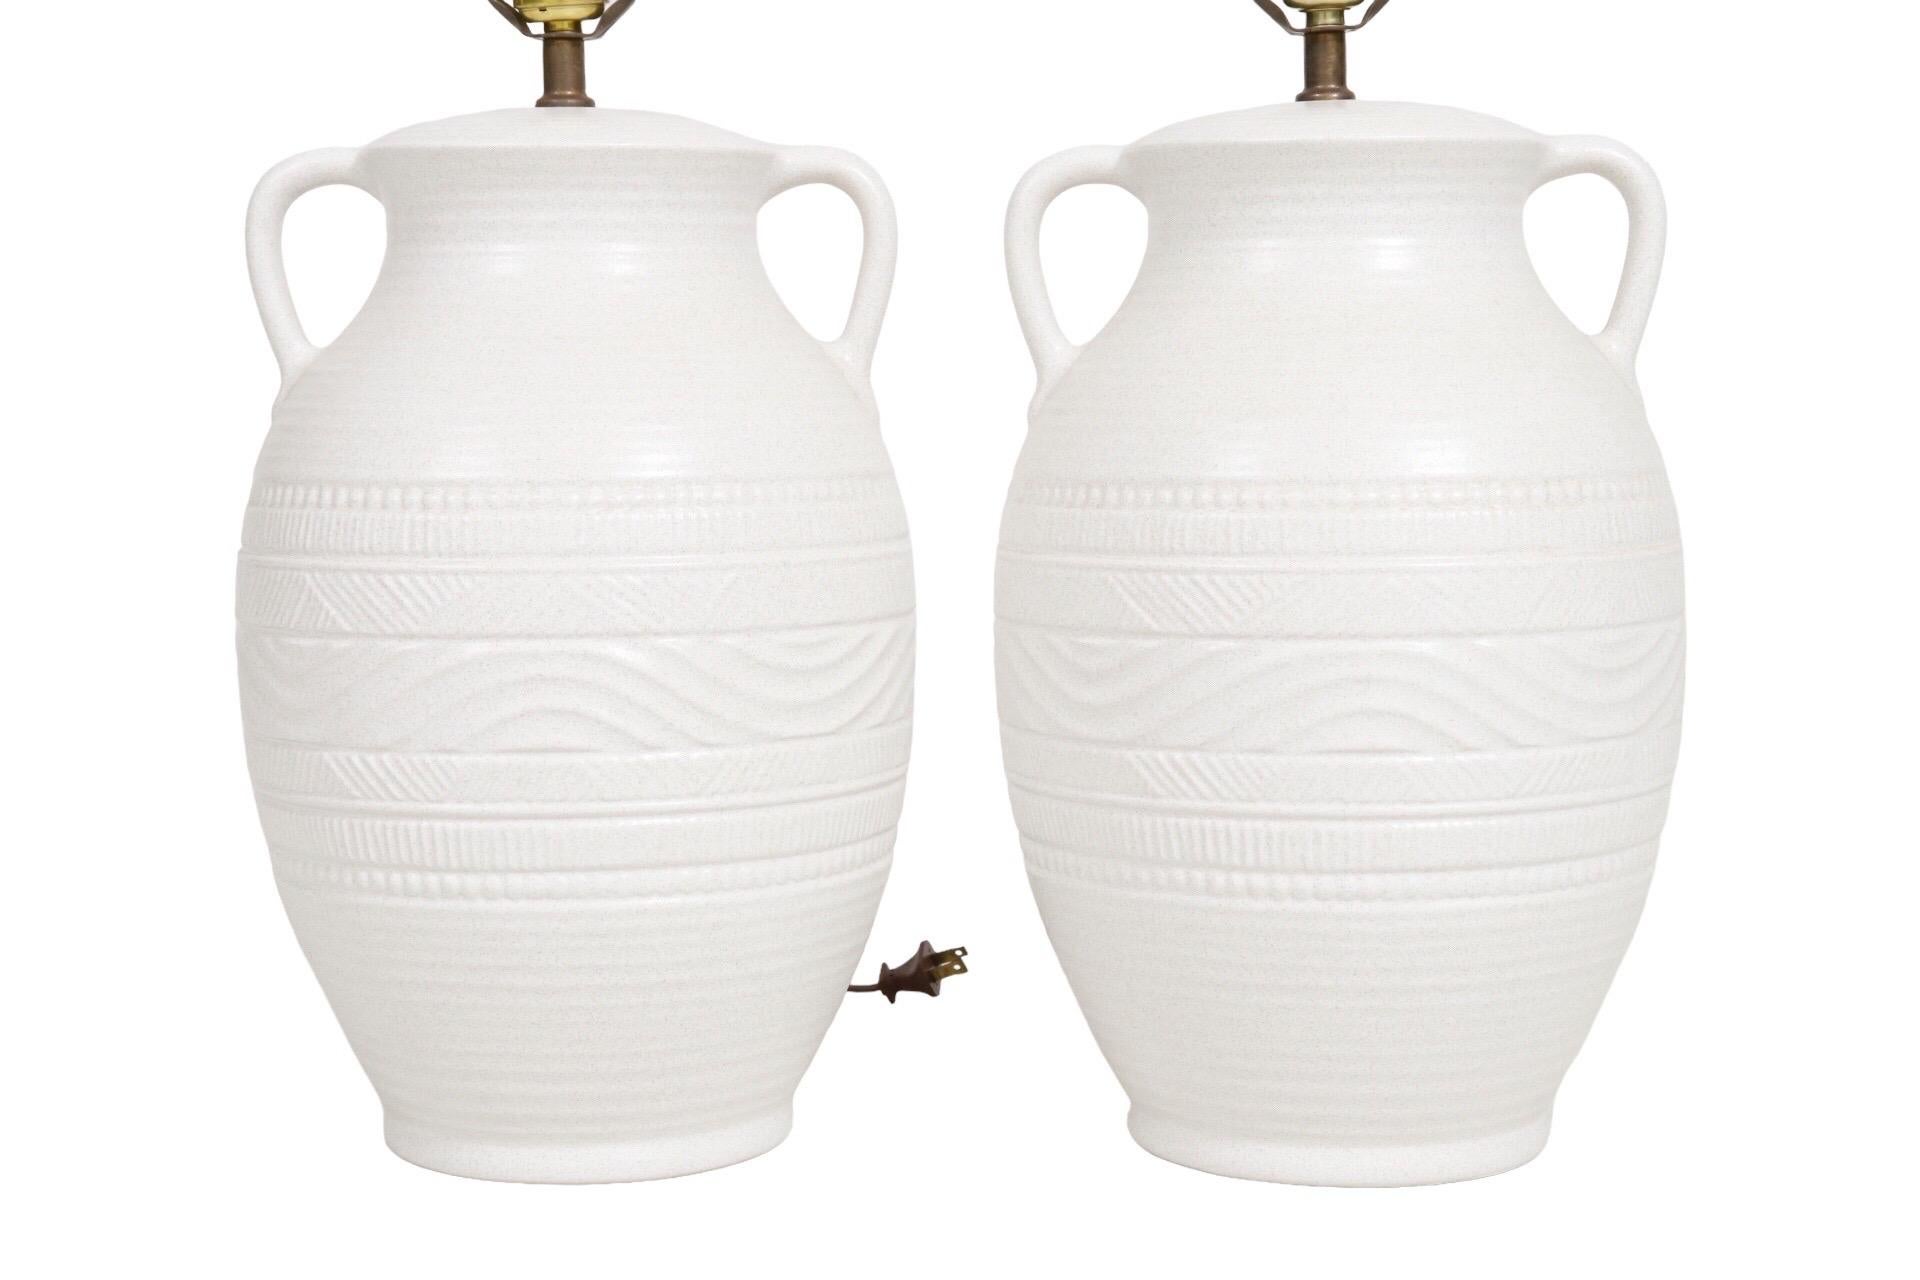 A pair of ceramic amphora shaped table lamps in white. At the neck are two small handles. Vases are pressed with undulating waves and geometric lines. Each lamp measures 9.5